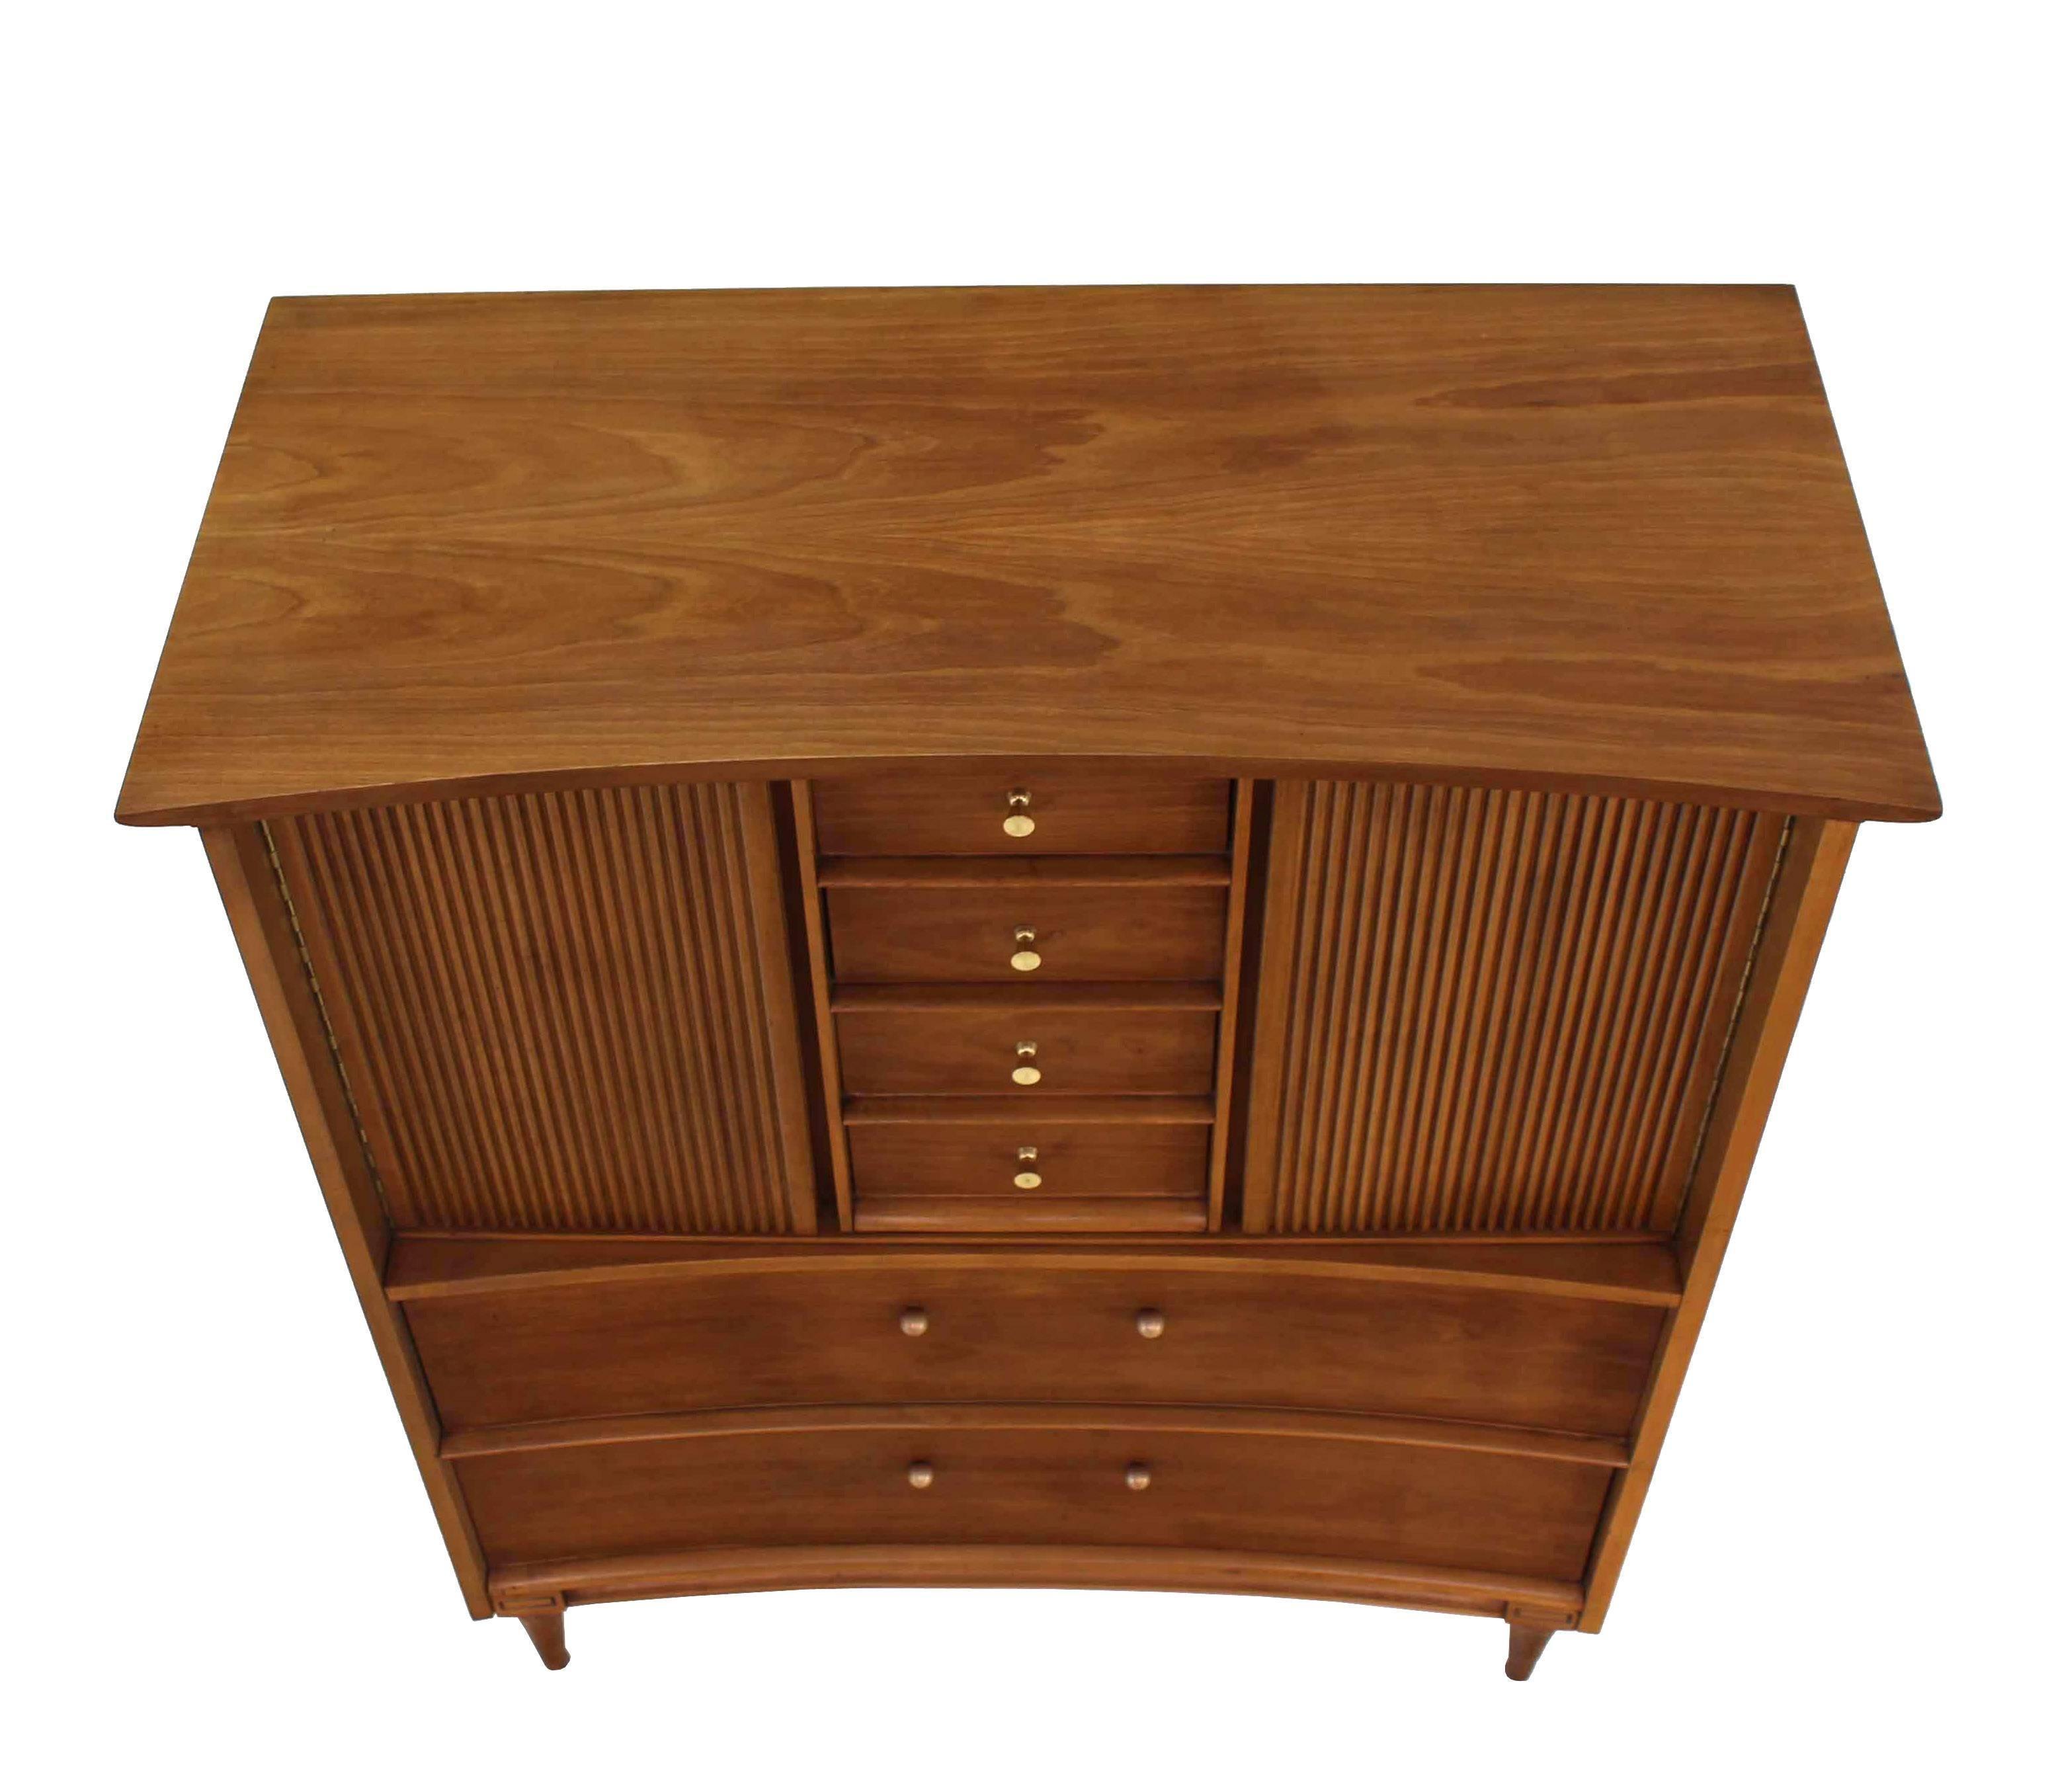 Very nice Mid-Century Modern concave front high chest dresser.